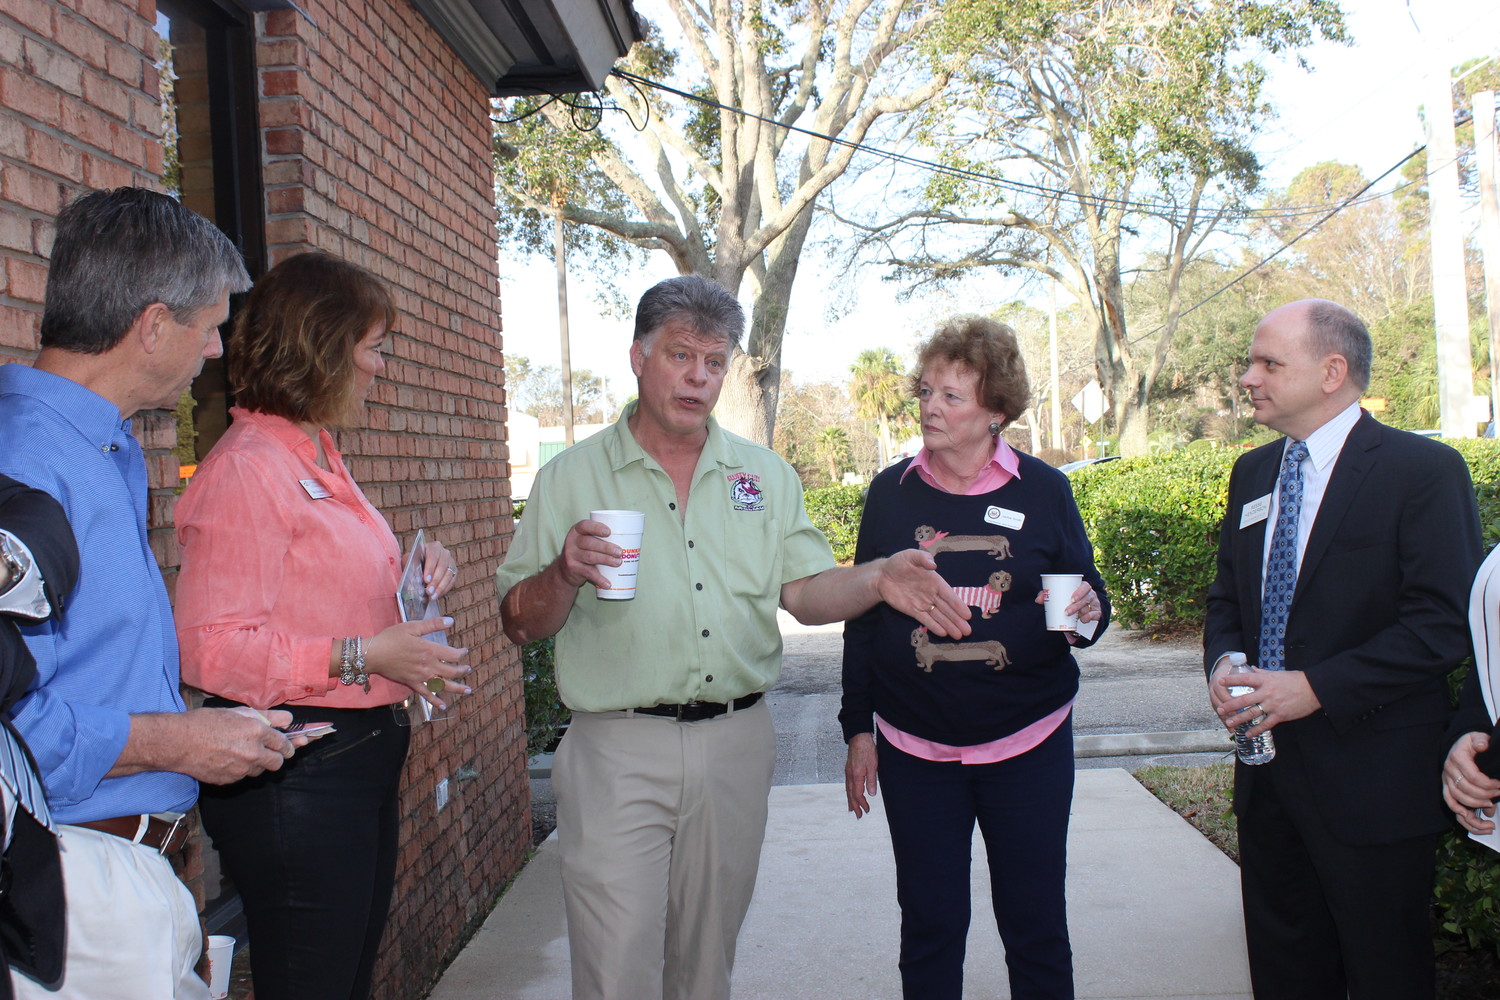 Fluffy Cuts owner Brian Anderson (center) speaks with fellow Chamber members at the “Before Hours” event on Feb. 7.